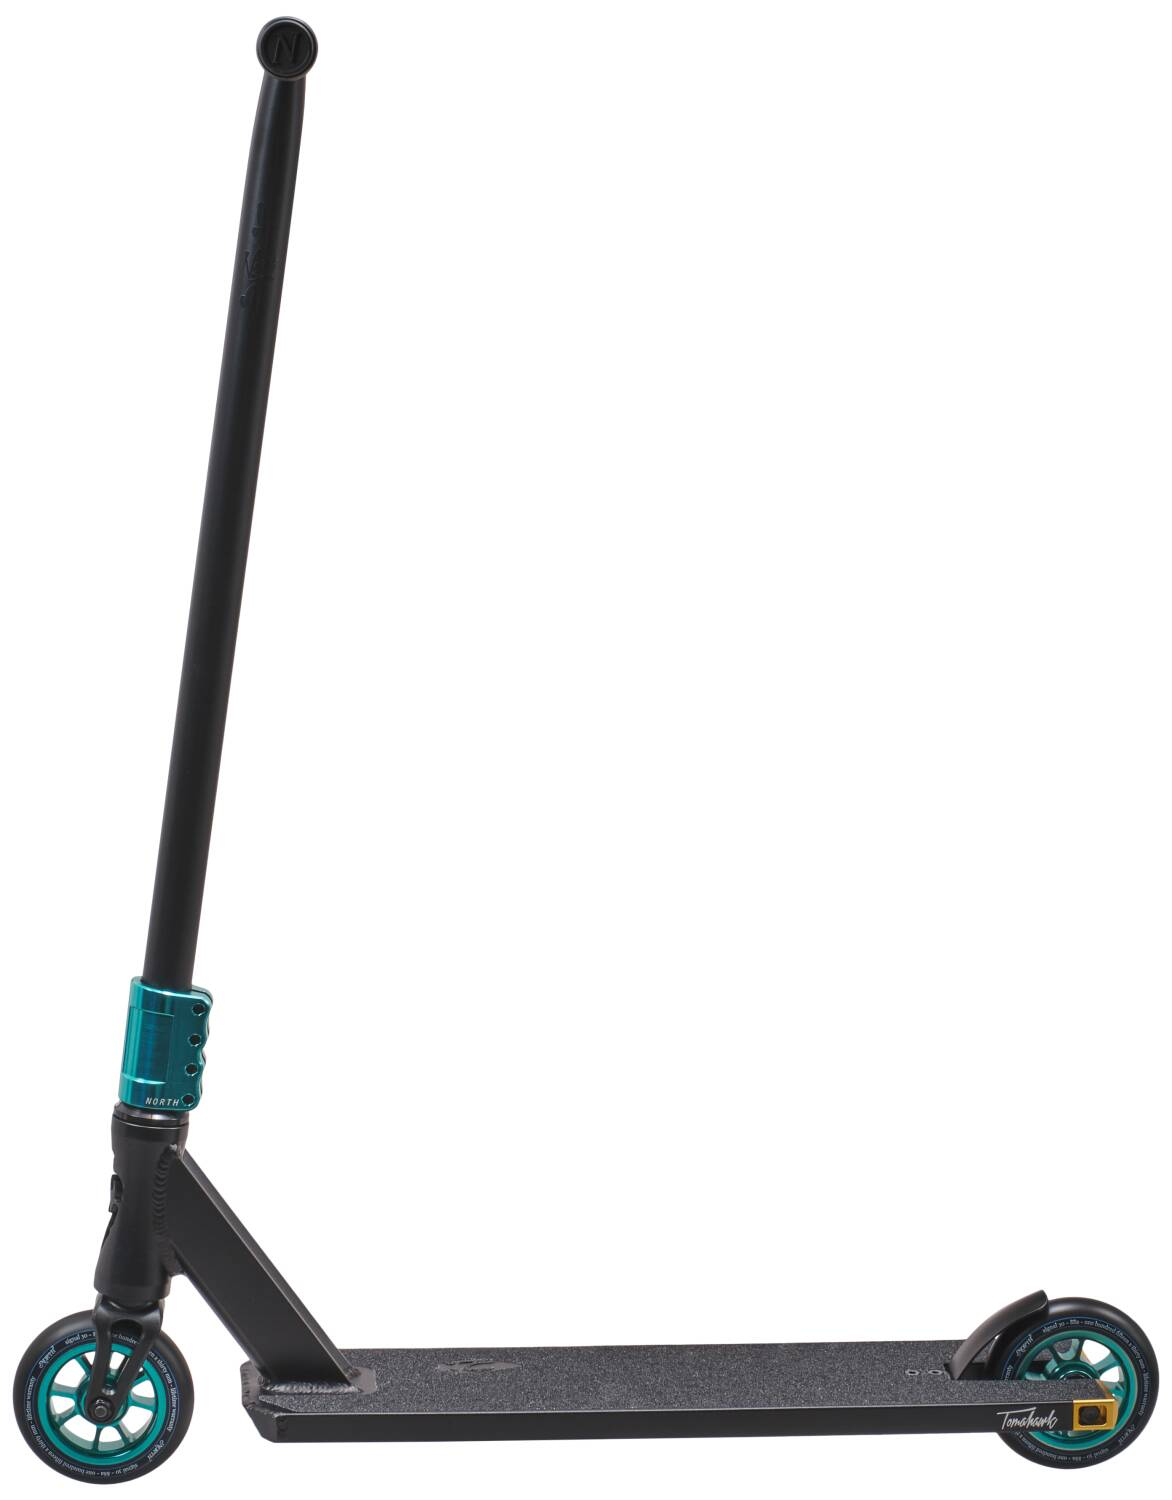 North Tomahawk Pro Scooter